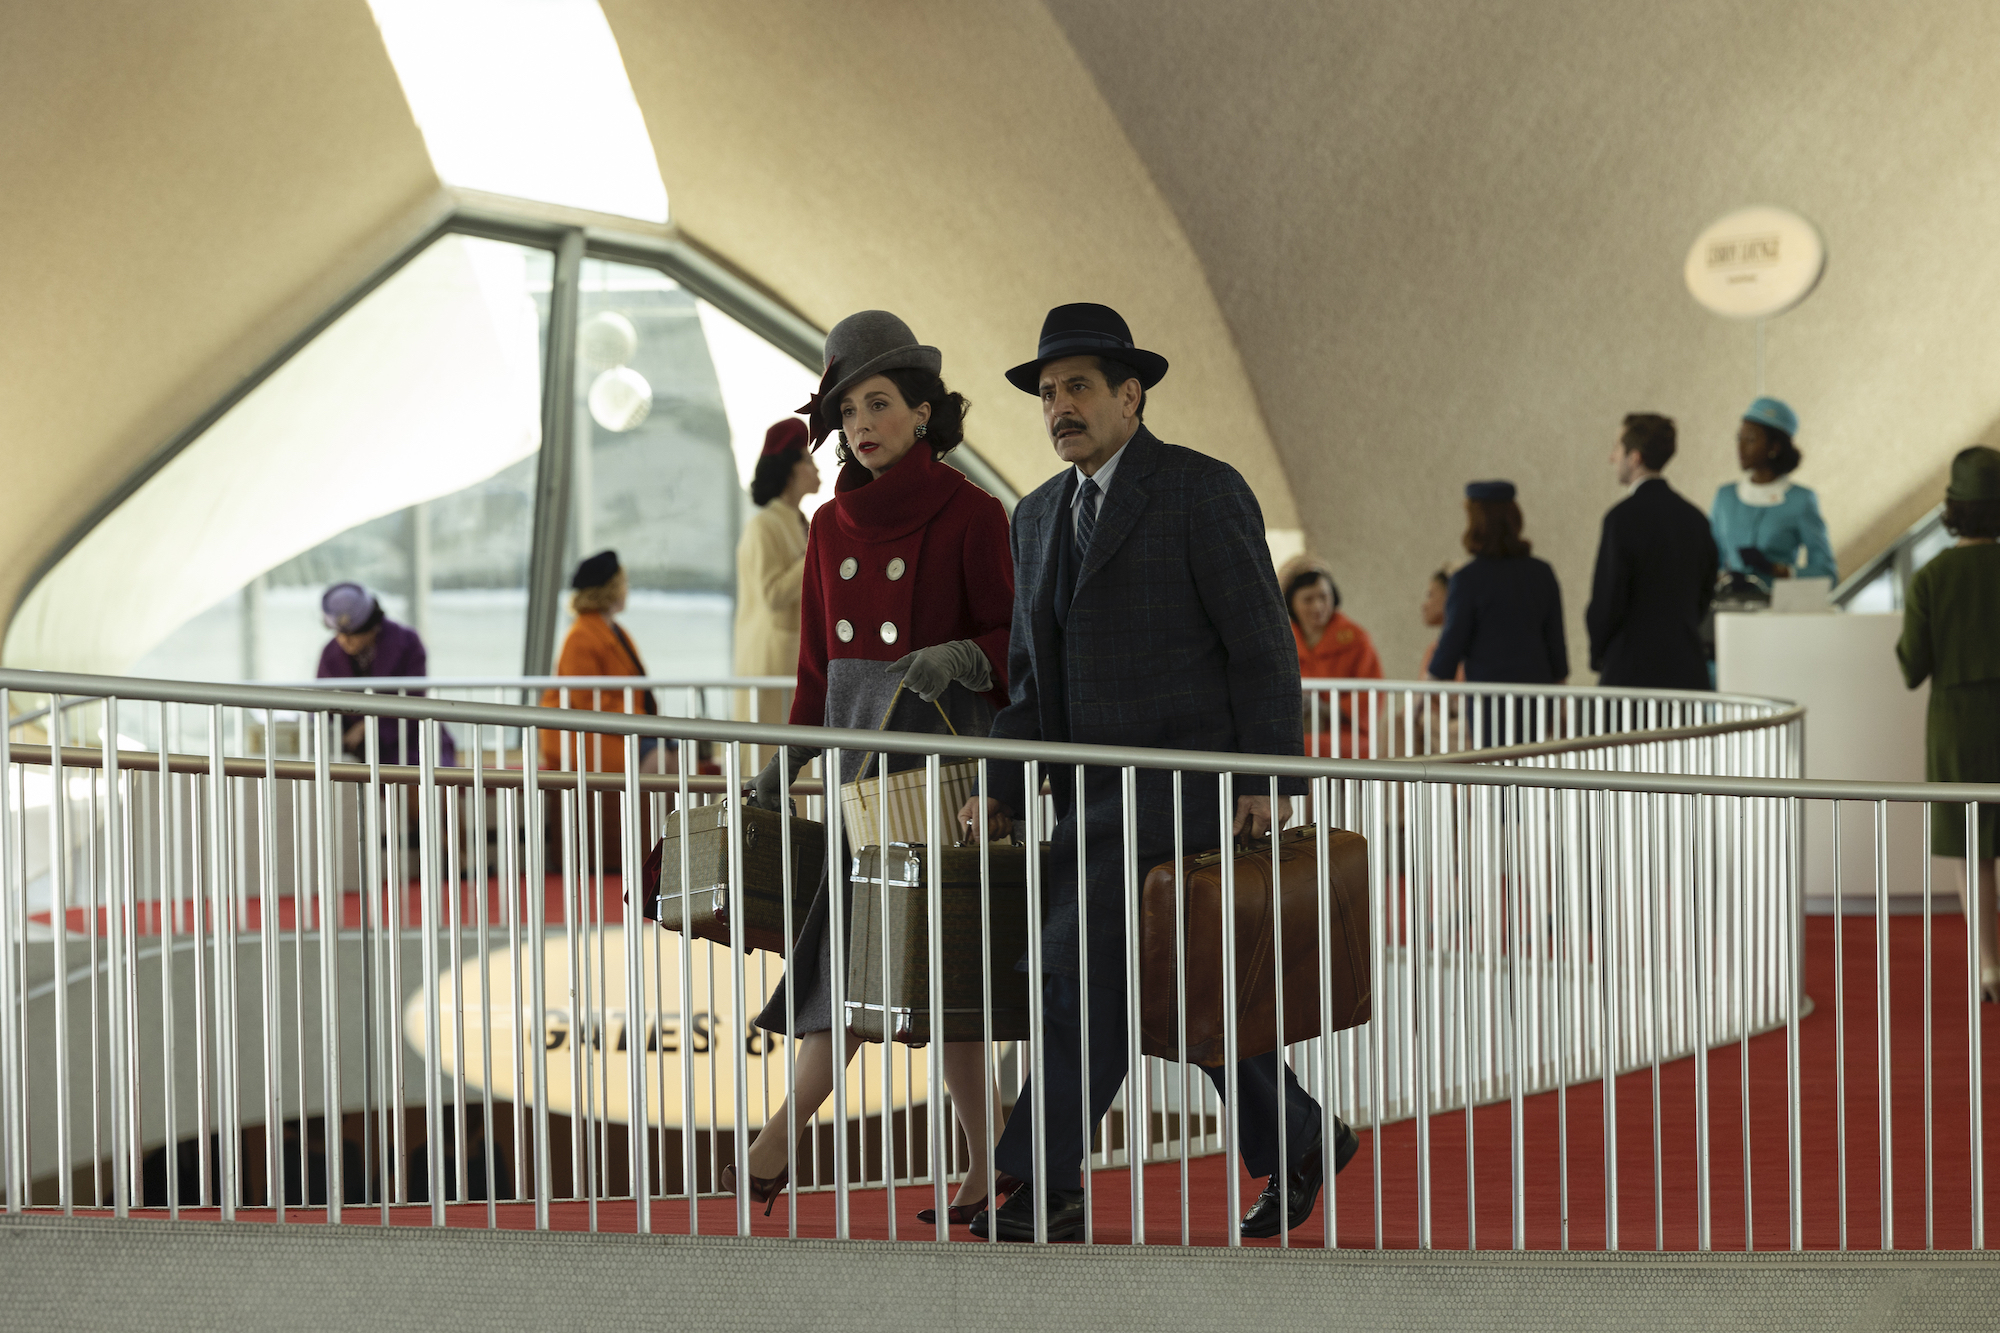 Marin Hiinkle as Rose Weissman and Tony Shalhoub as Abe Weissman at the Eero Saarinen-designed 1960s TWA terminal at JFK Airport in The Marvelous Mrs. Maisel - Effect Magazine